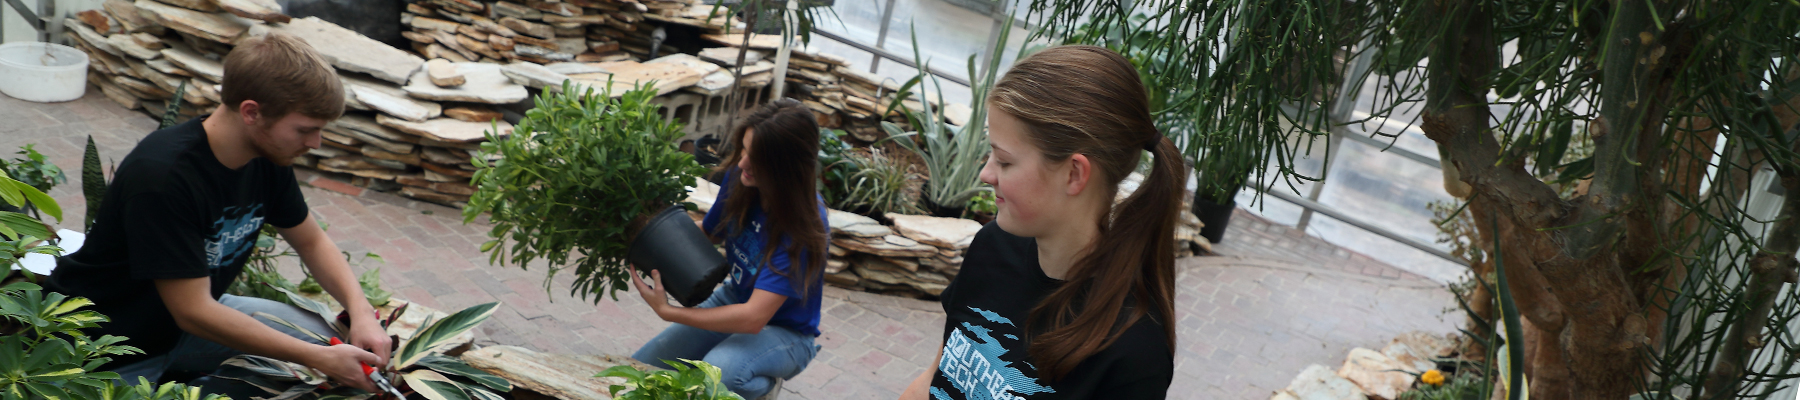 Horticulture students working in greenhouse